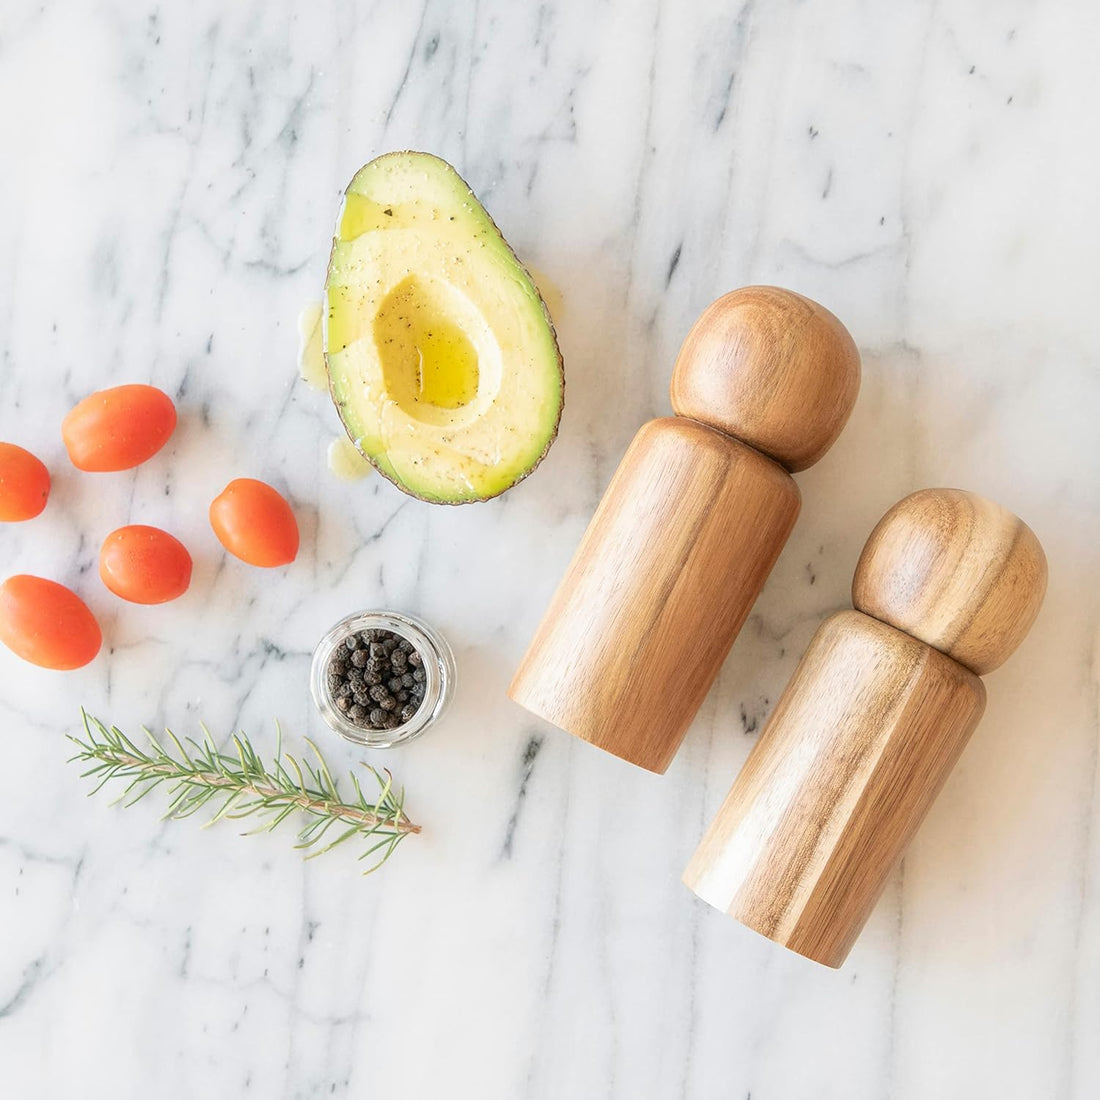 MONDAY MOOSE Manual Refillable Solid Acacia Wood Salt and Pepper Grinder Spice Mill Set Carbon Steel Rotor with Adjustable Coarseness (Small, 2pcs - Grinders)